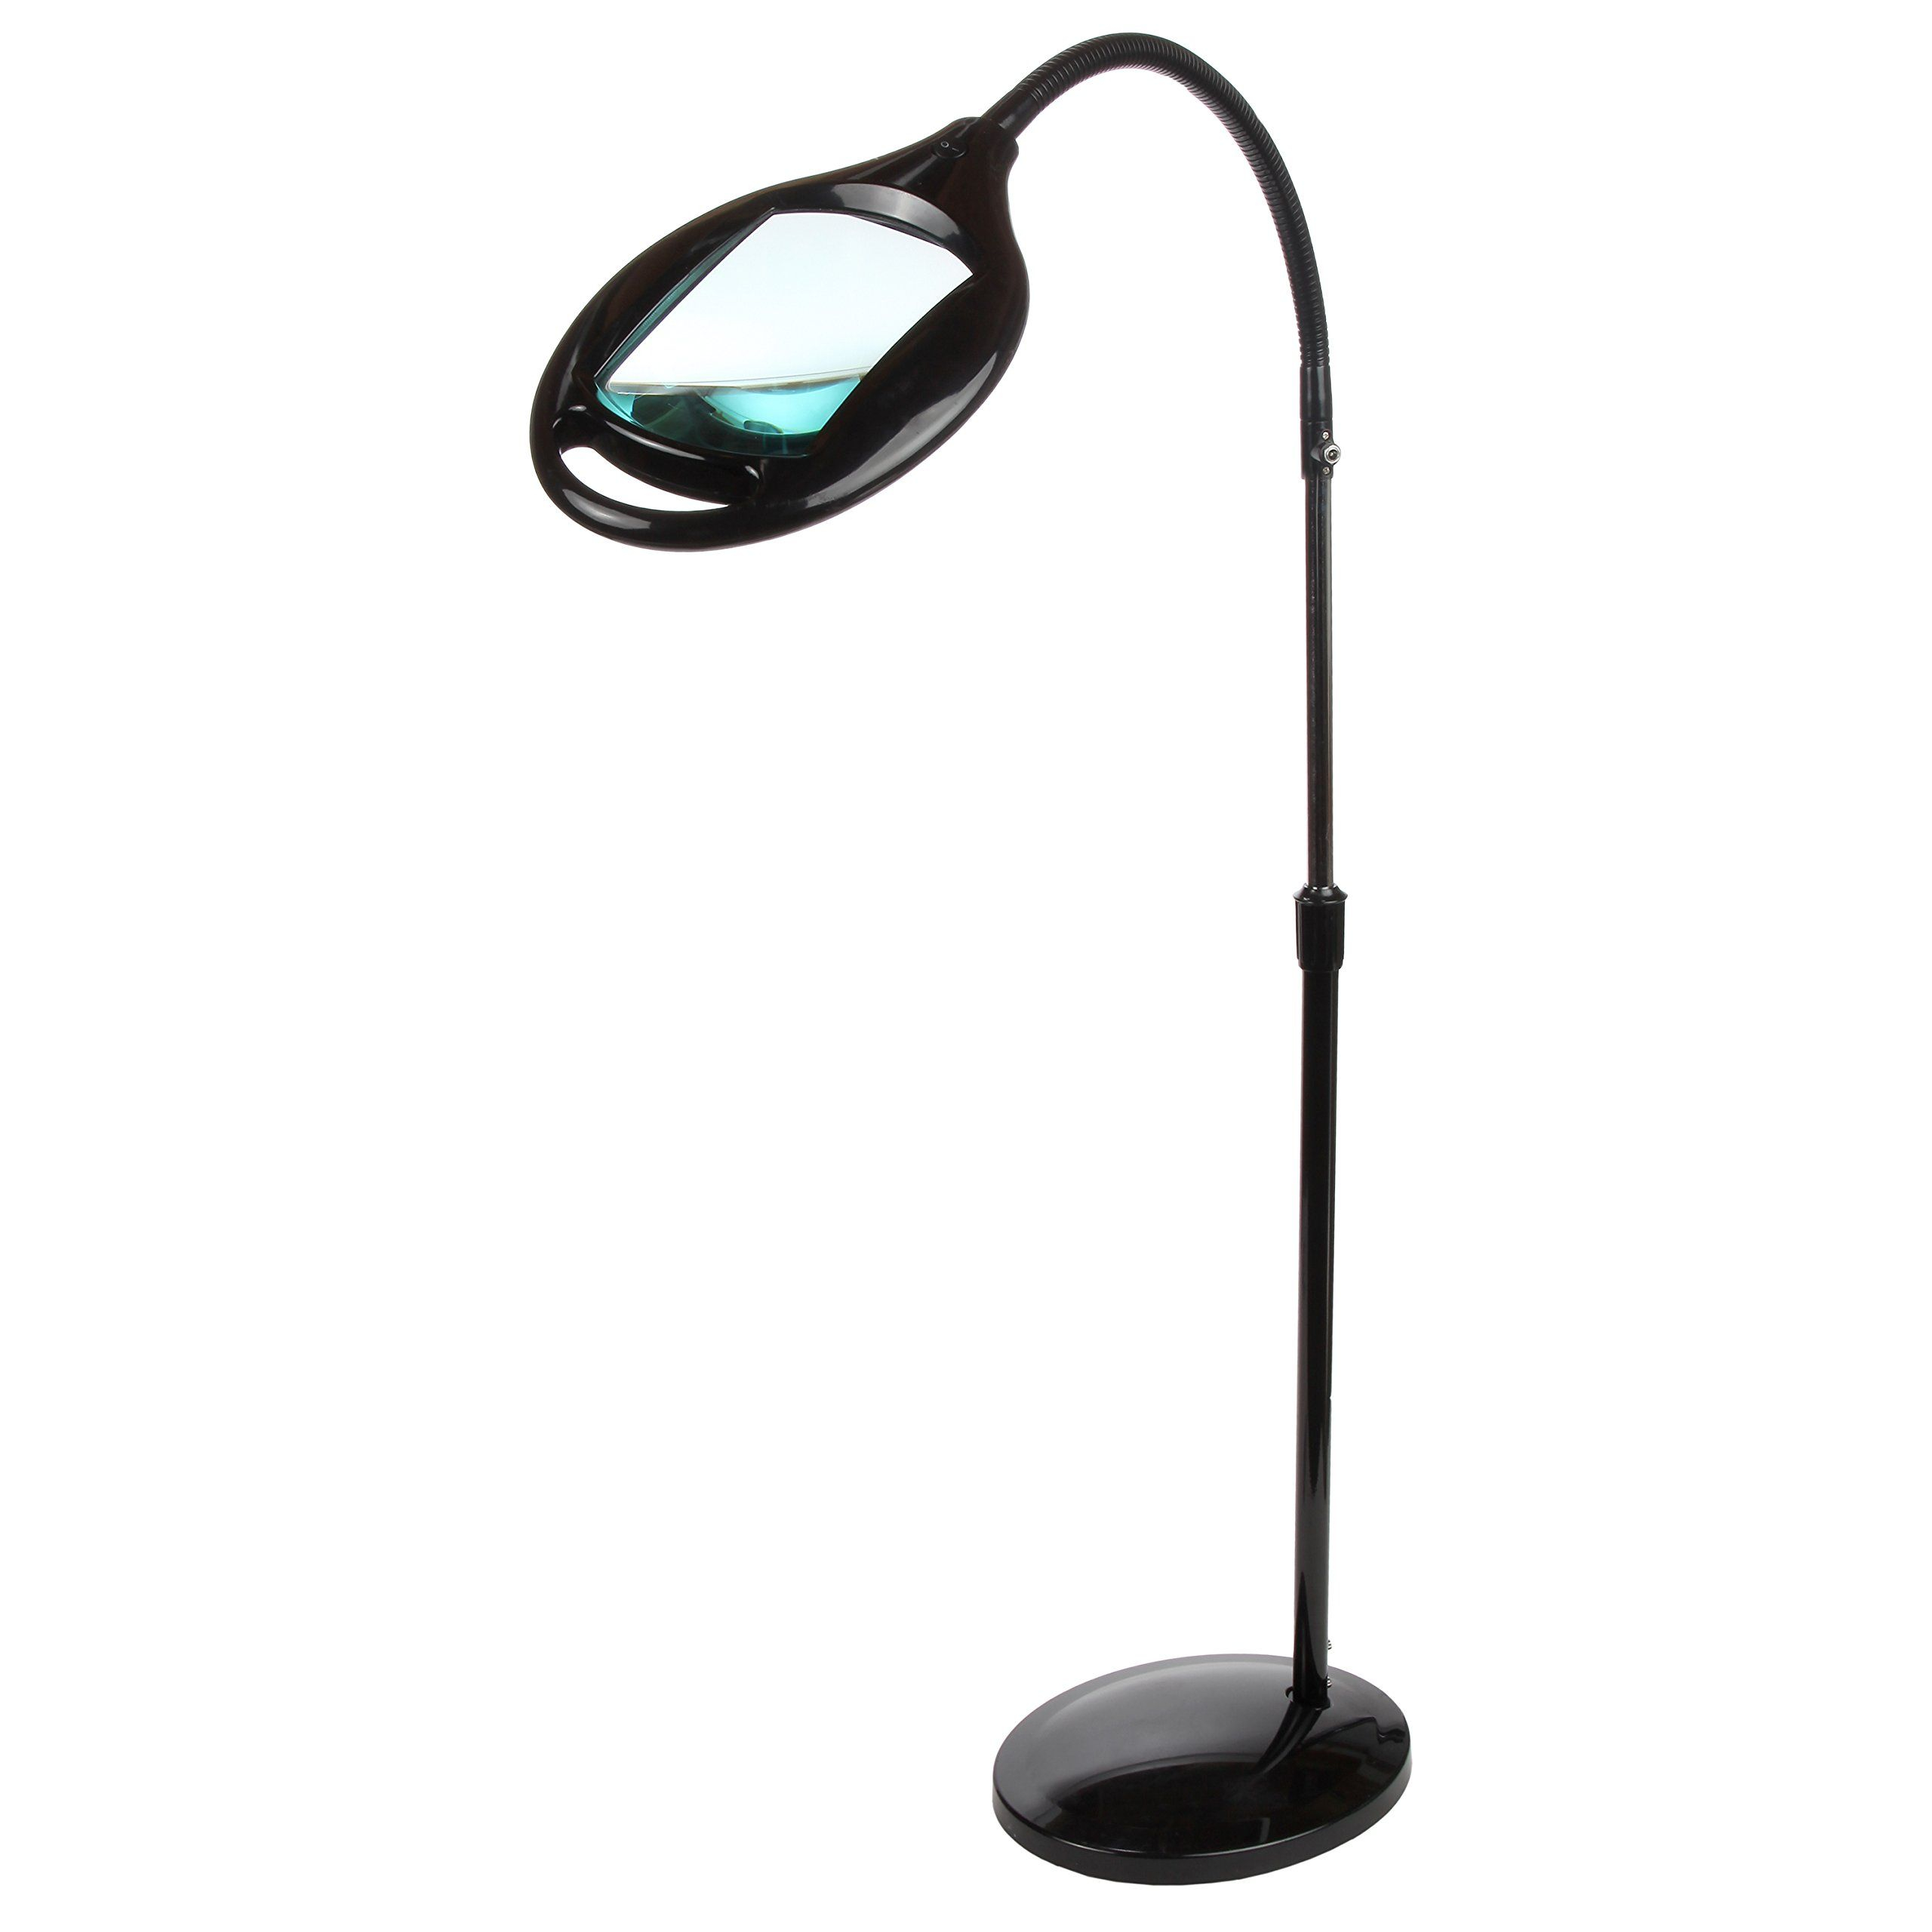 Brightech Lightview Pro Led Magnifying Glass Floor Lamp within dimensions 2560 X 2560